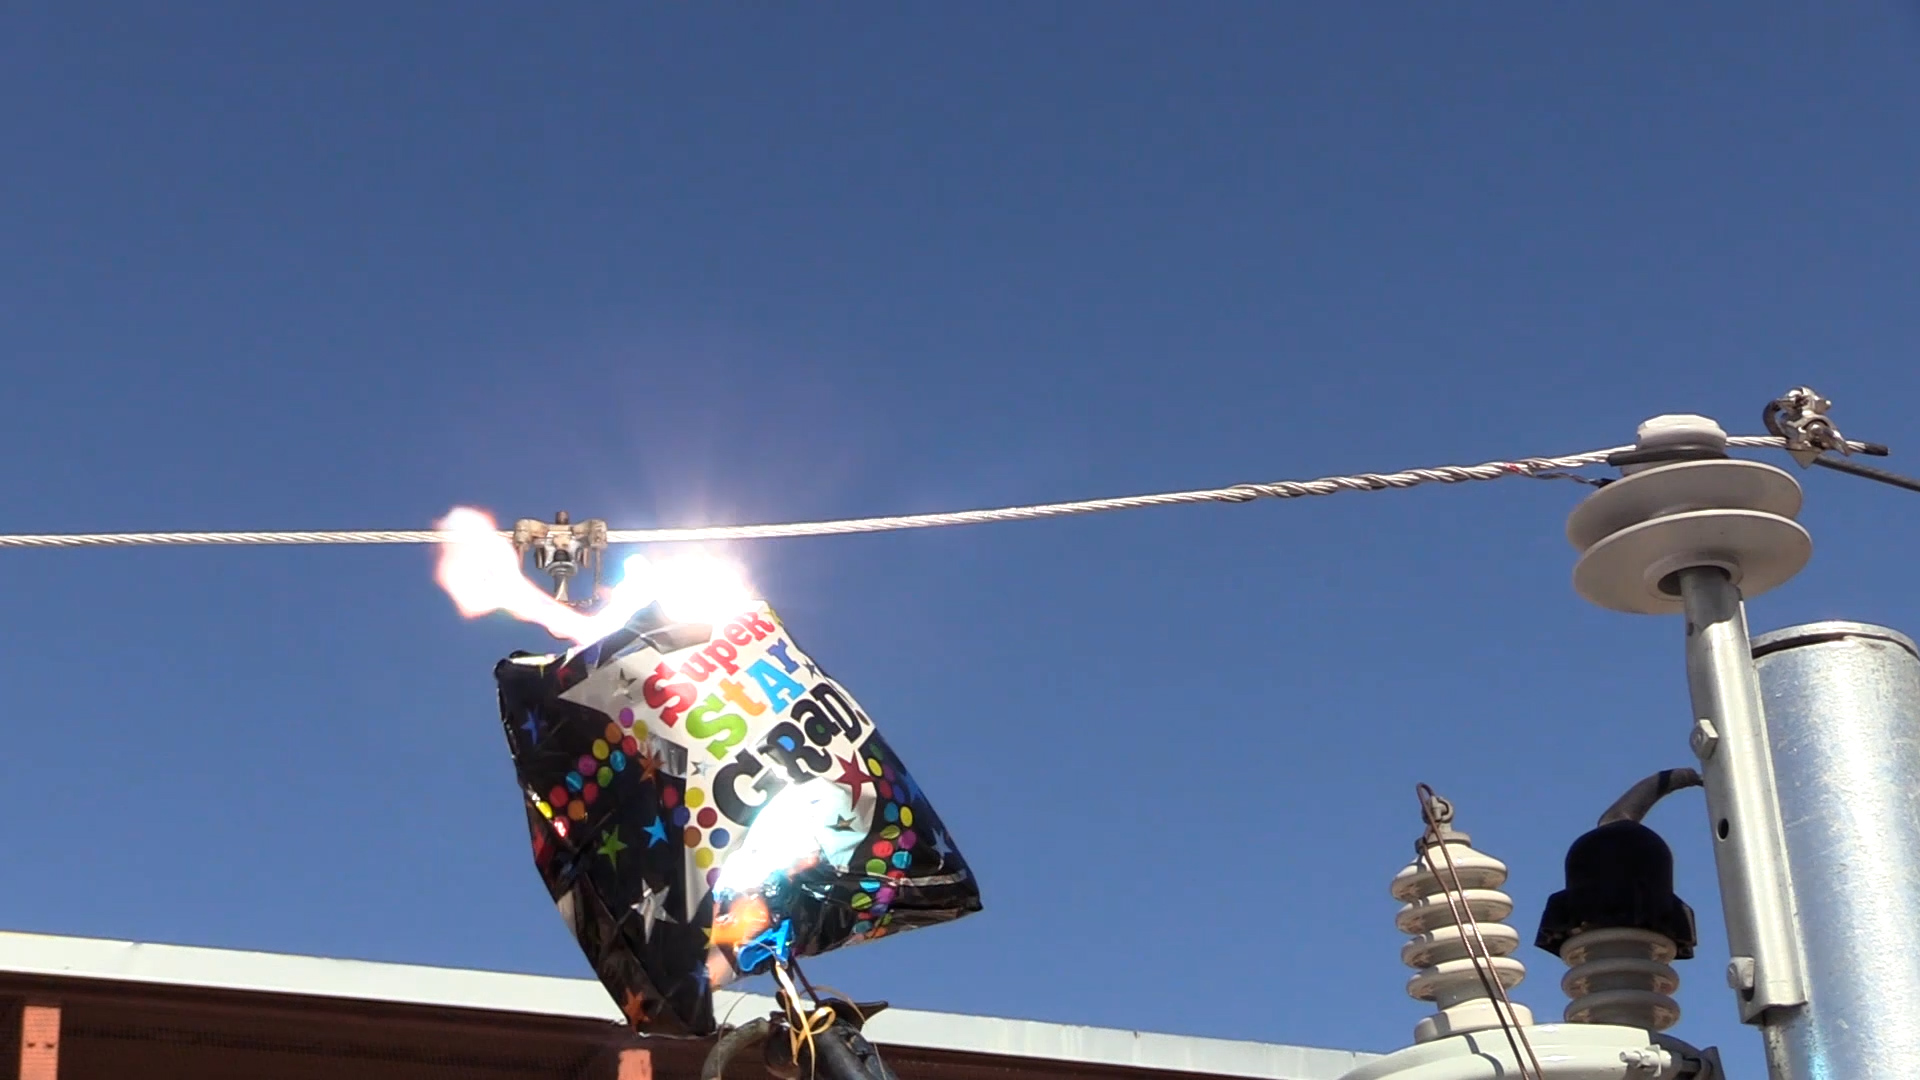 A Mylar balloon in contact with a power line igniting a spark 